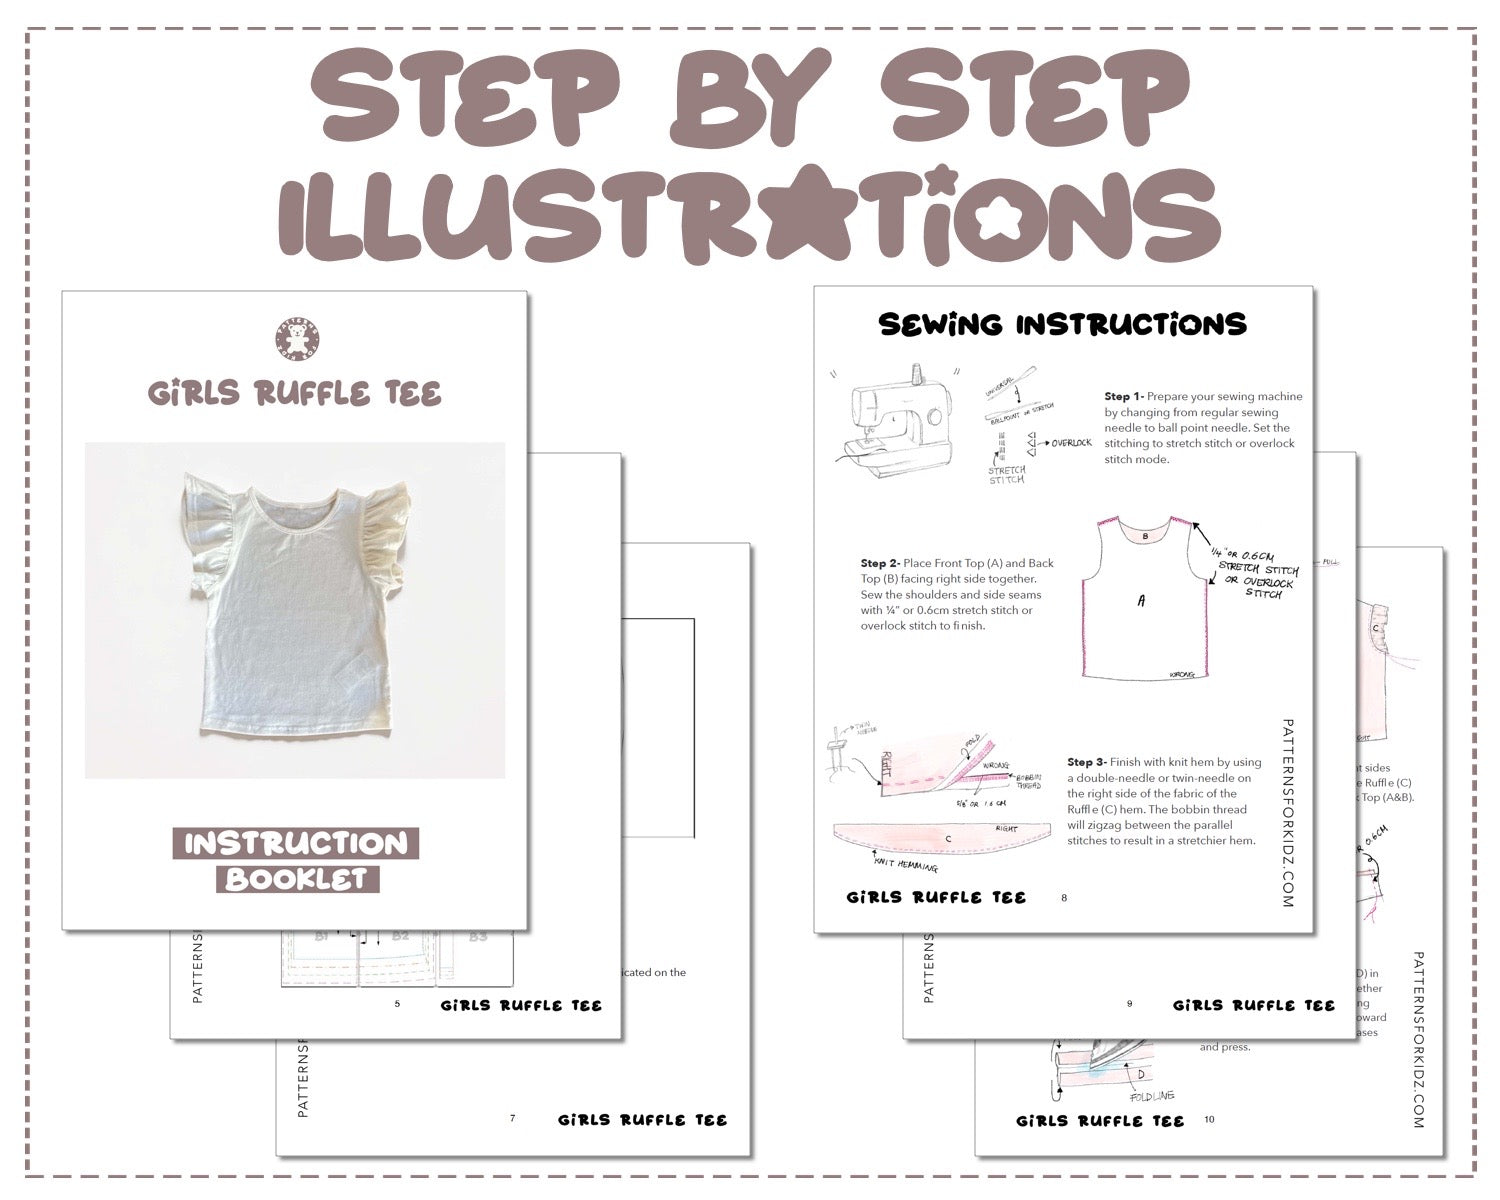 Girls Ruffle Tee sewing pattern step by step illustrations.